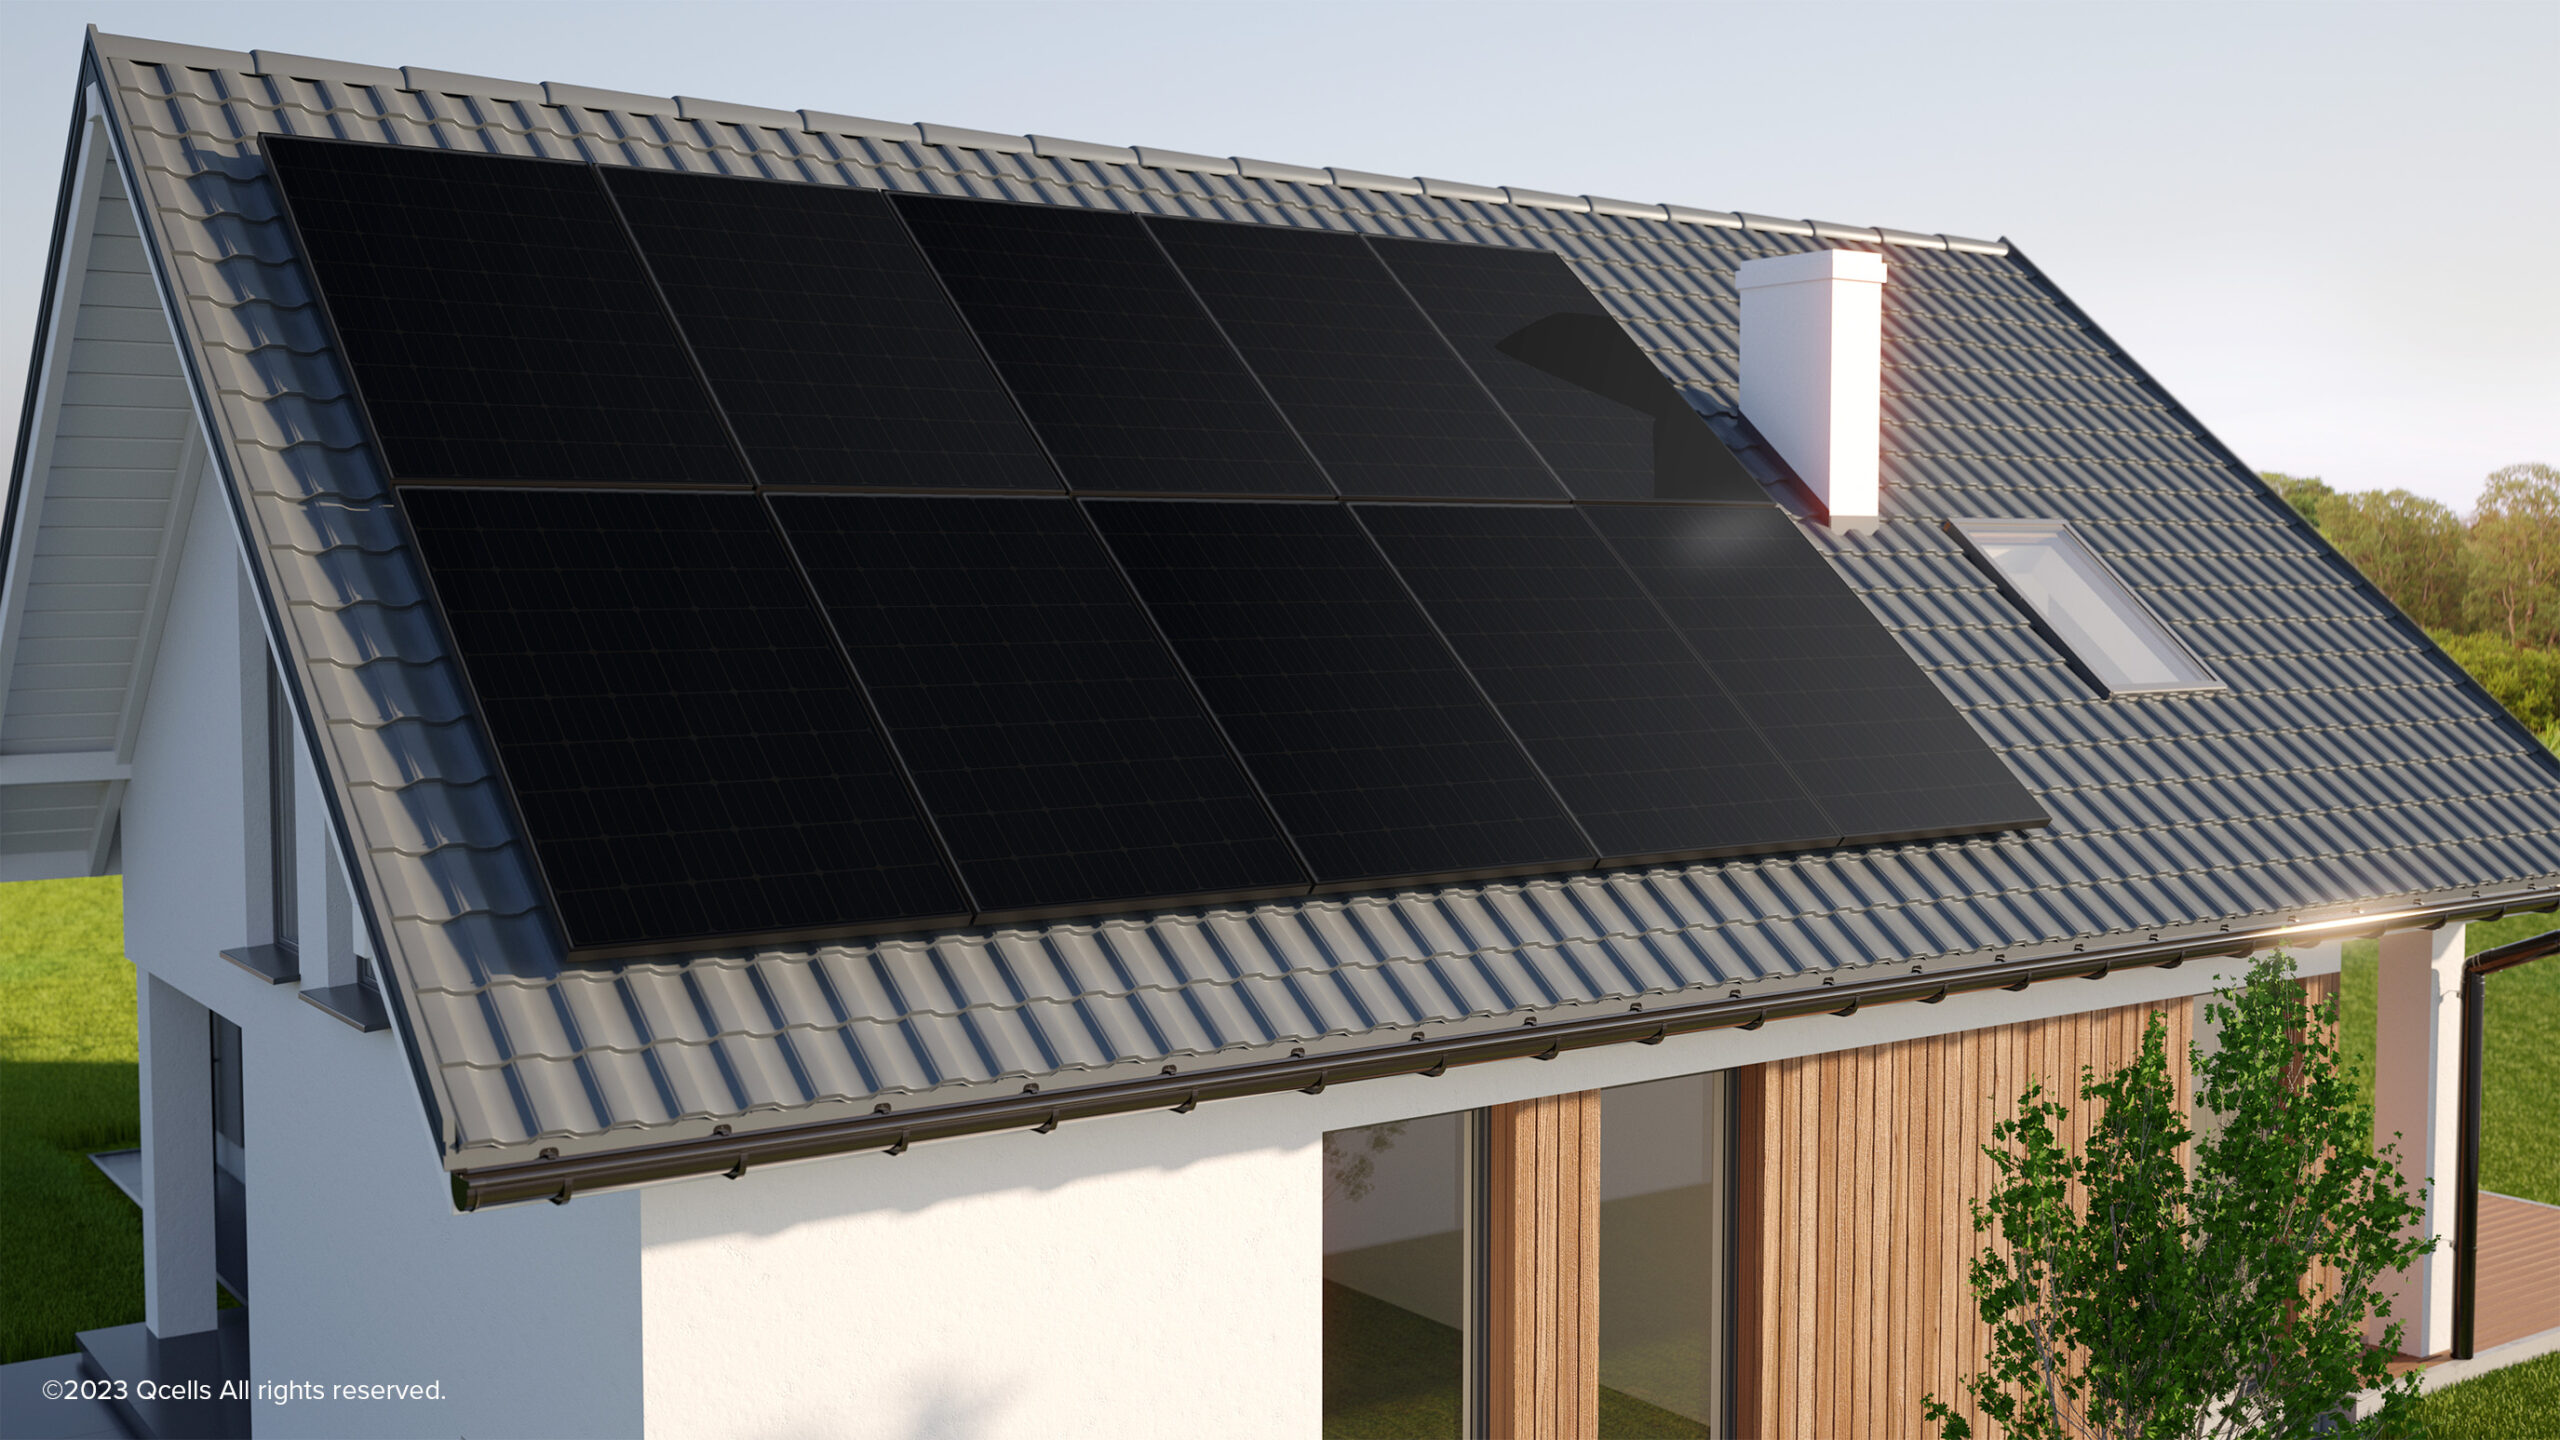 Solar panels on the roof or a residential home